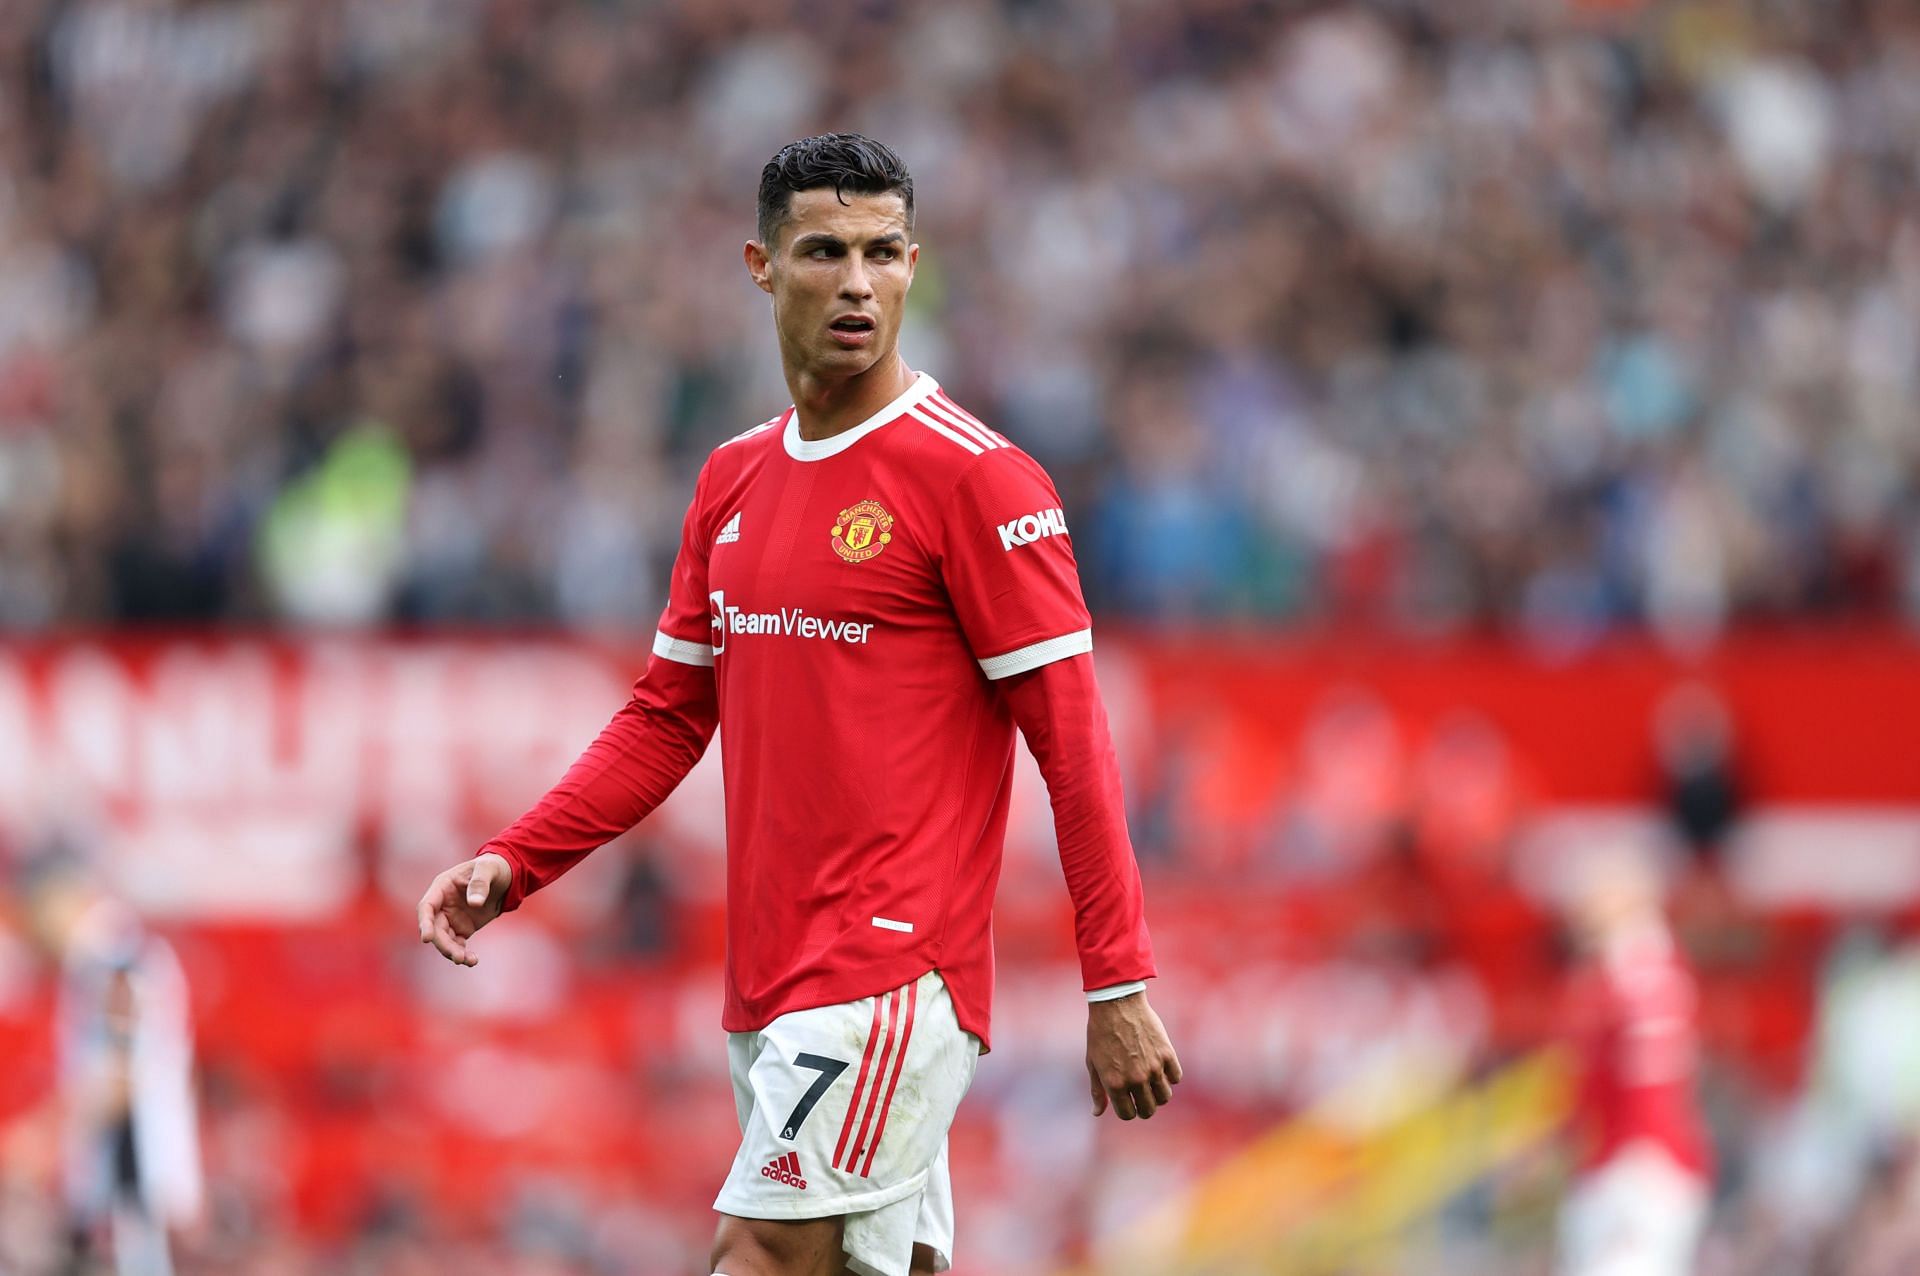 Arsenal couldn't counter Manchester United's offer for Cristiano Ronaldo.